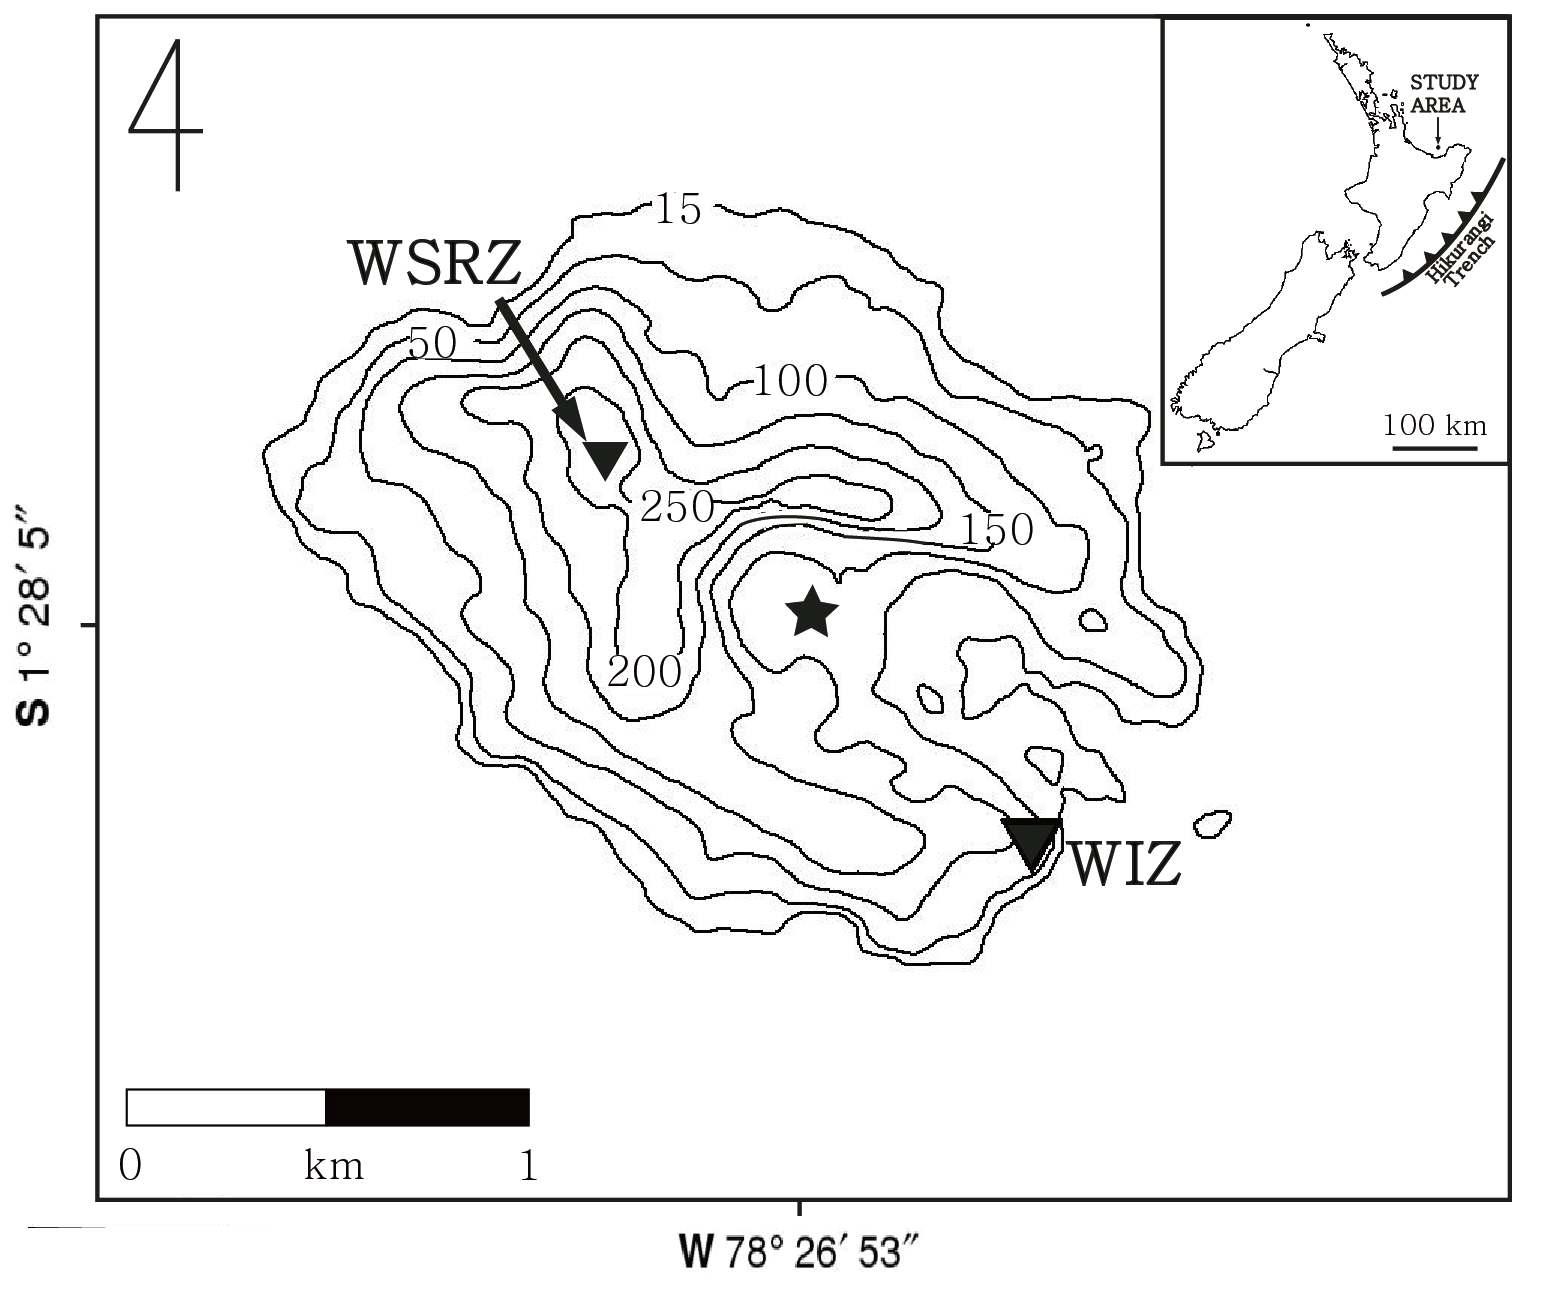 Elevation map showing locations of seismic stations WSRZ and WIZ (inverted triangles) and the main crater (star) on White Island, New Zealand. The inset map shows the location of White Island (arrow) to northeast of the North Island.